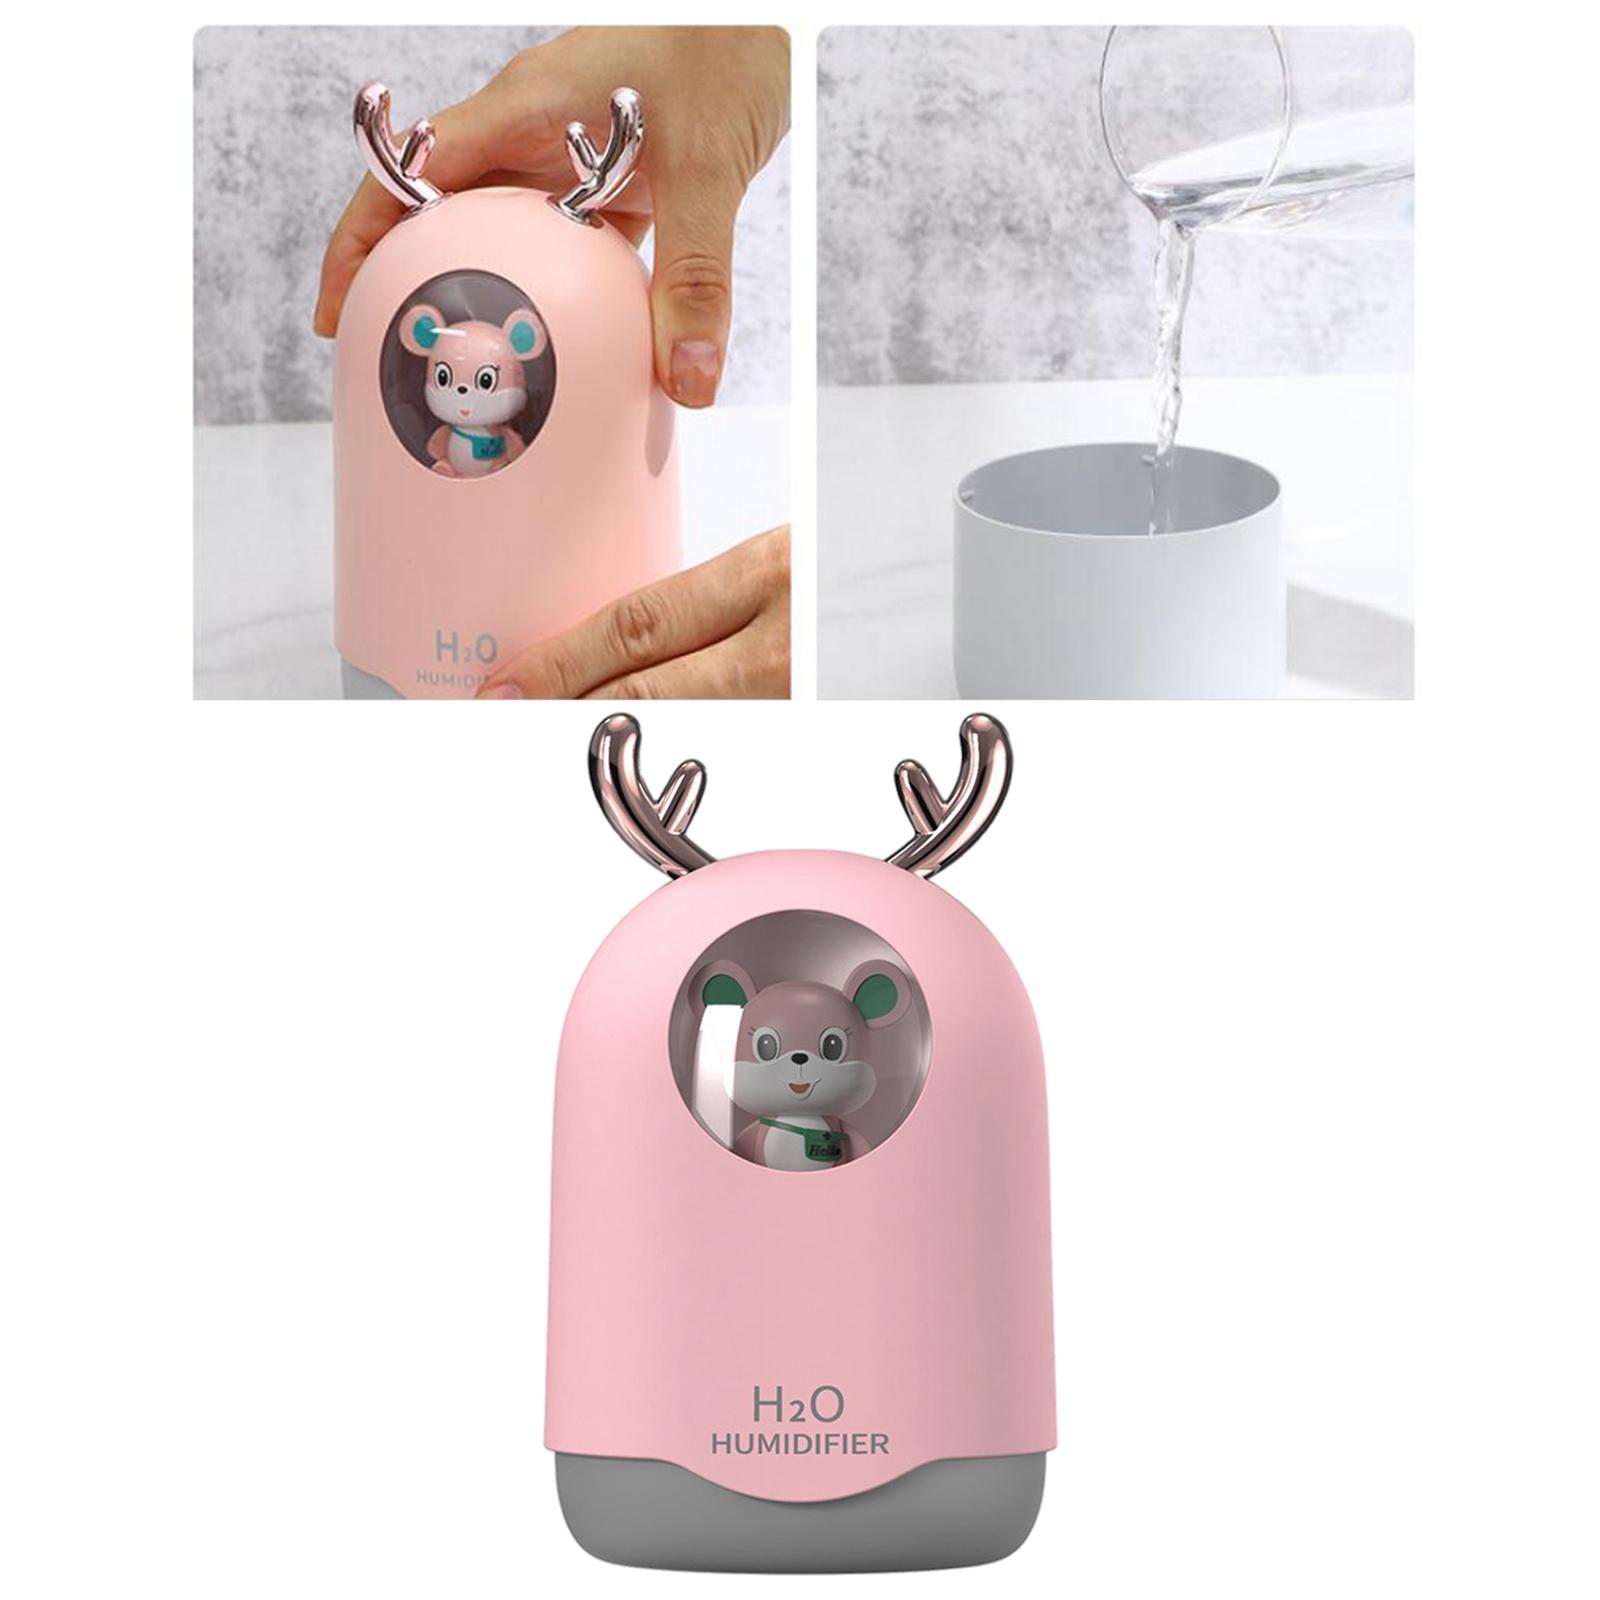 Air Humidifier Aromatherapy Diffuser Frangrance for Baby Room Desktop Pink